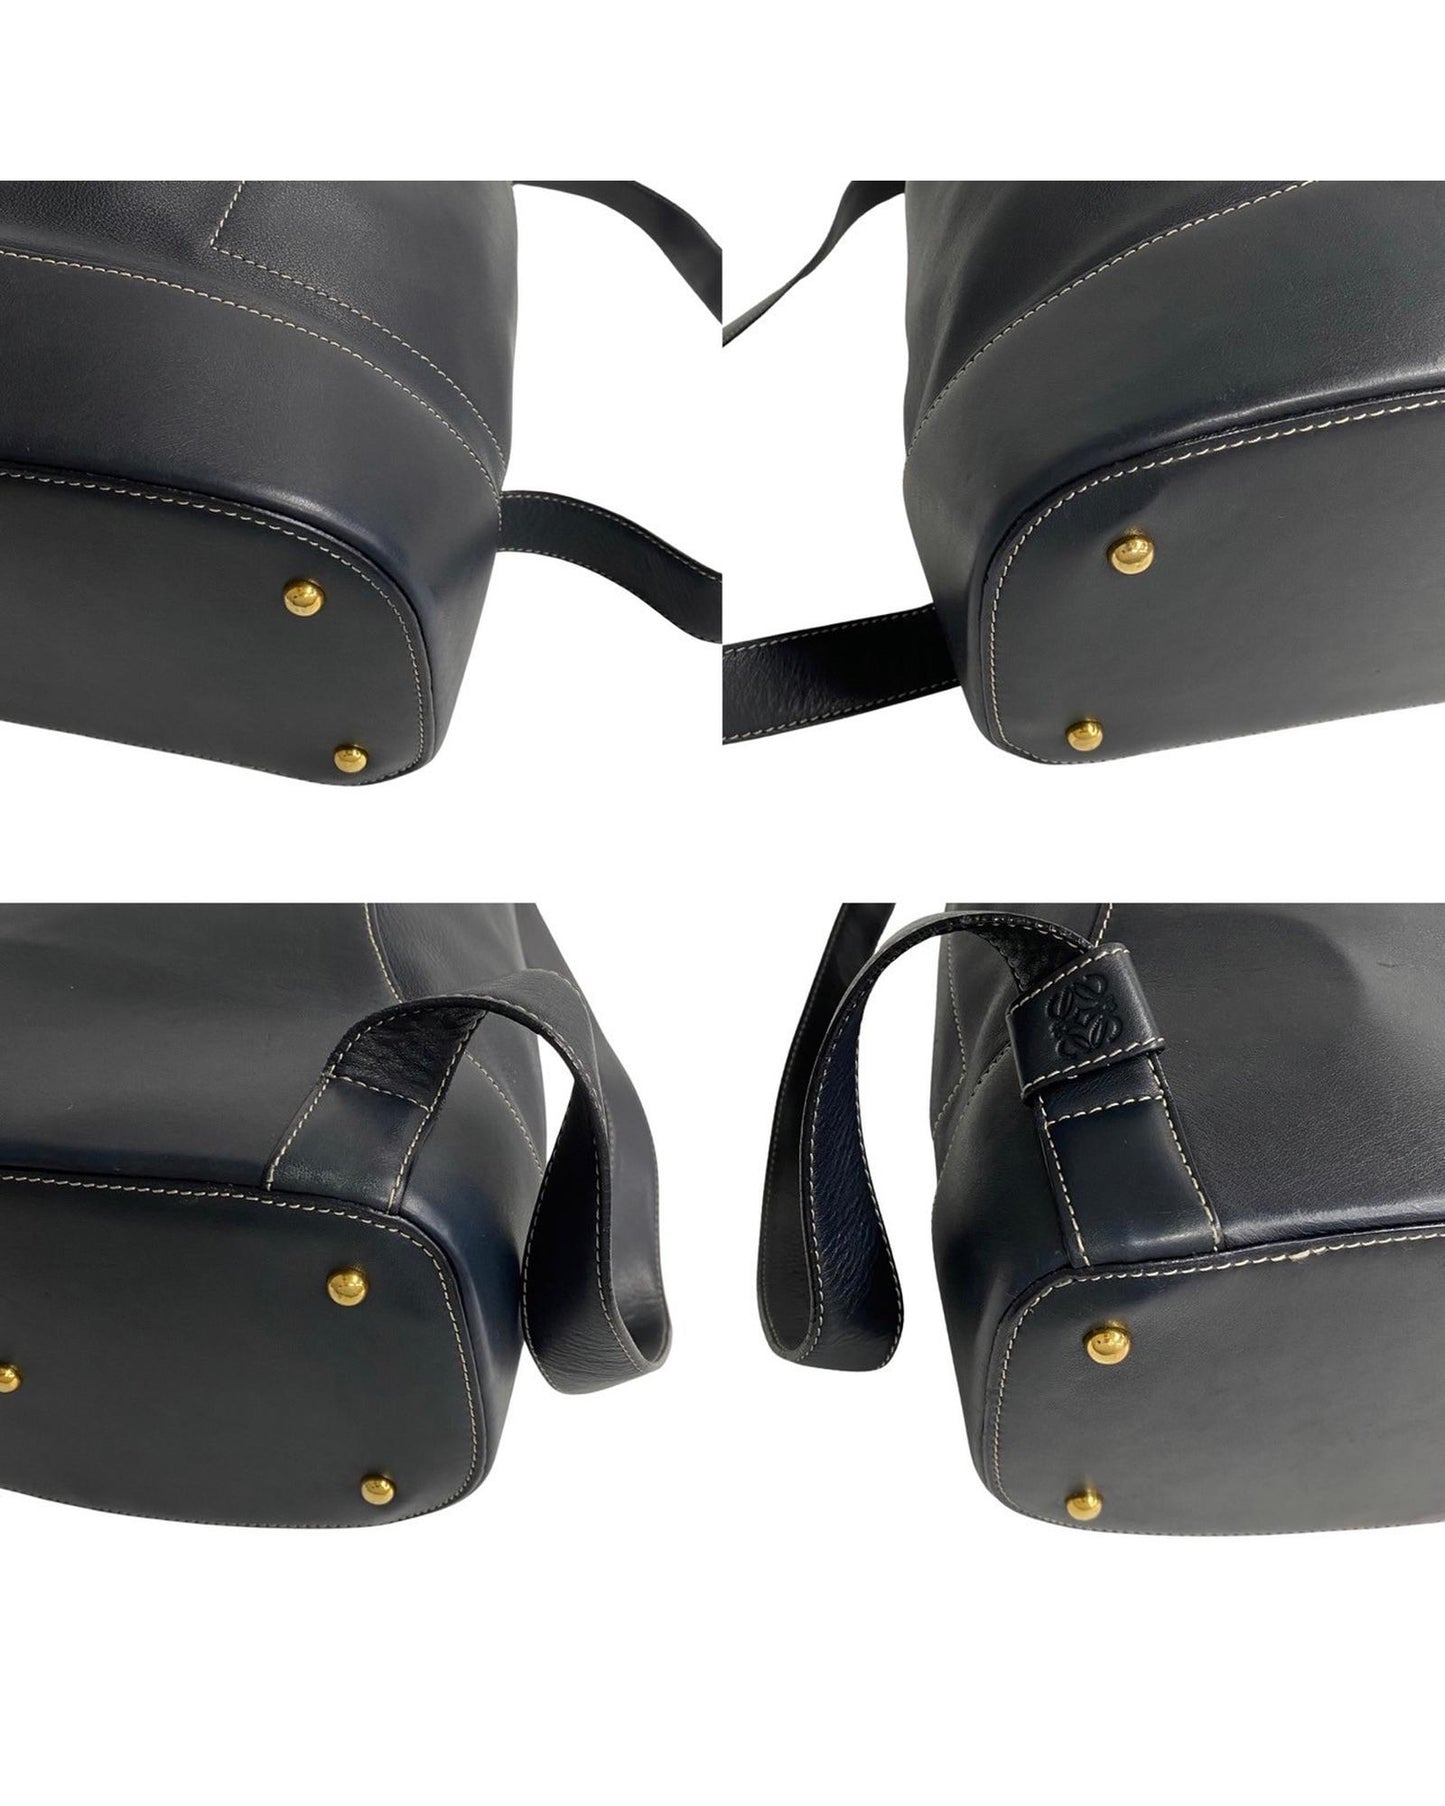 Loewe Women's Leather Backpack in Excellent Condition by Loewe in Black leather.